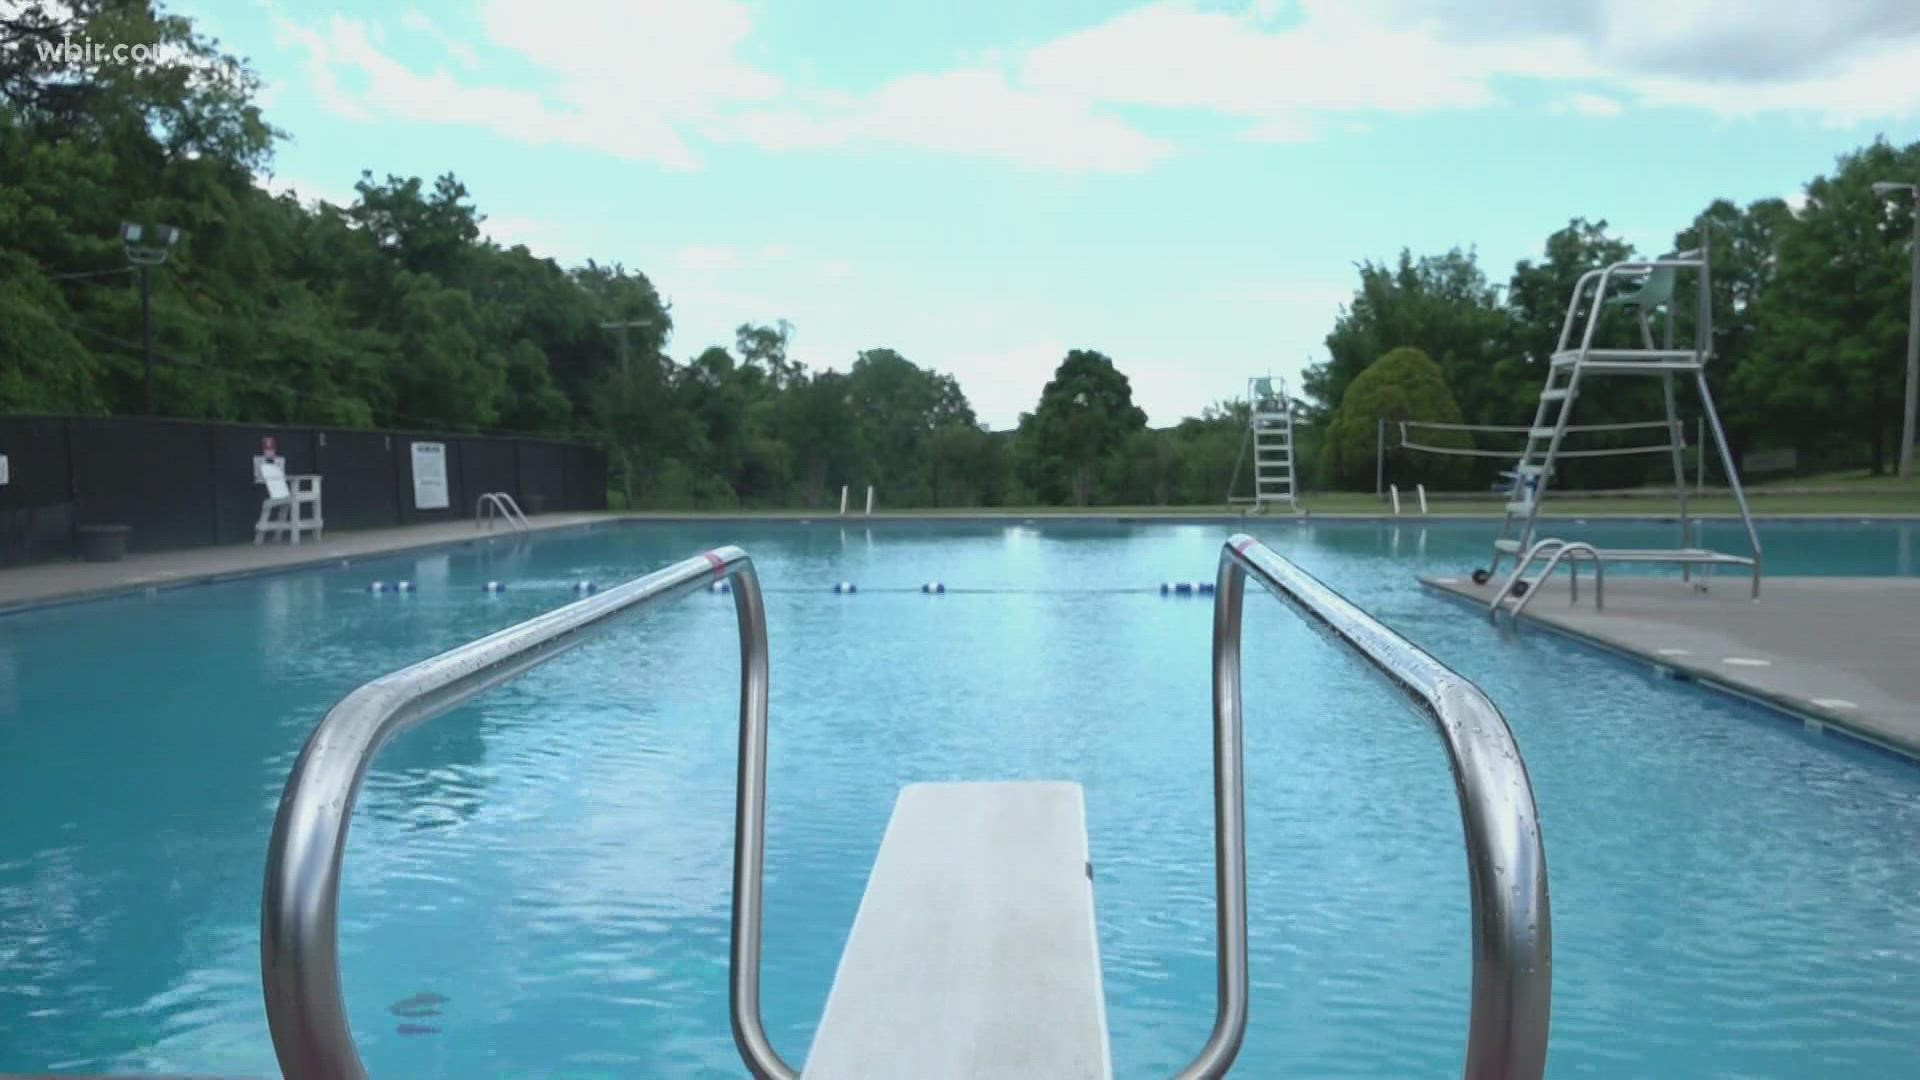 Across the U.S. a third of pools could stay closed this summer because of a shortage of lifeguards, according to the American Lifeguard Association.